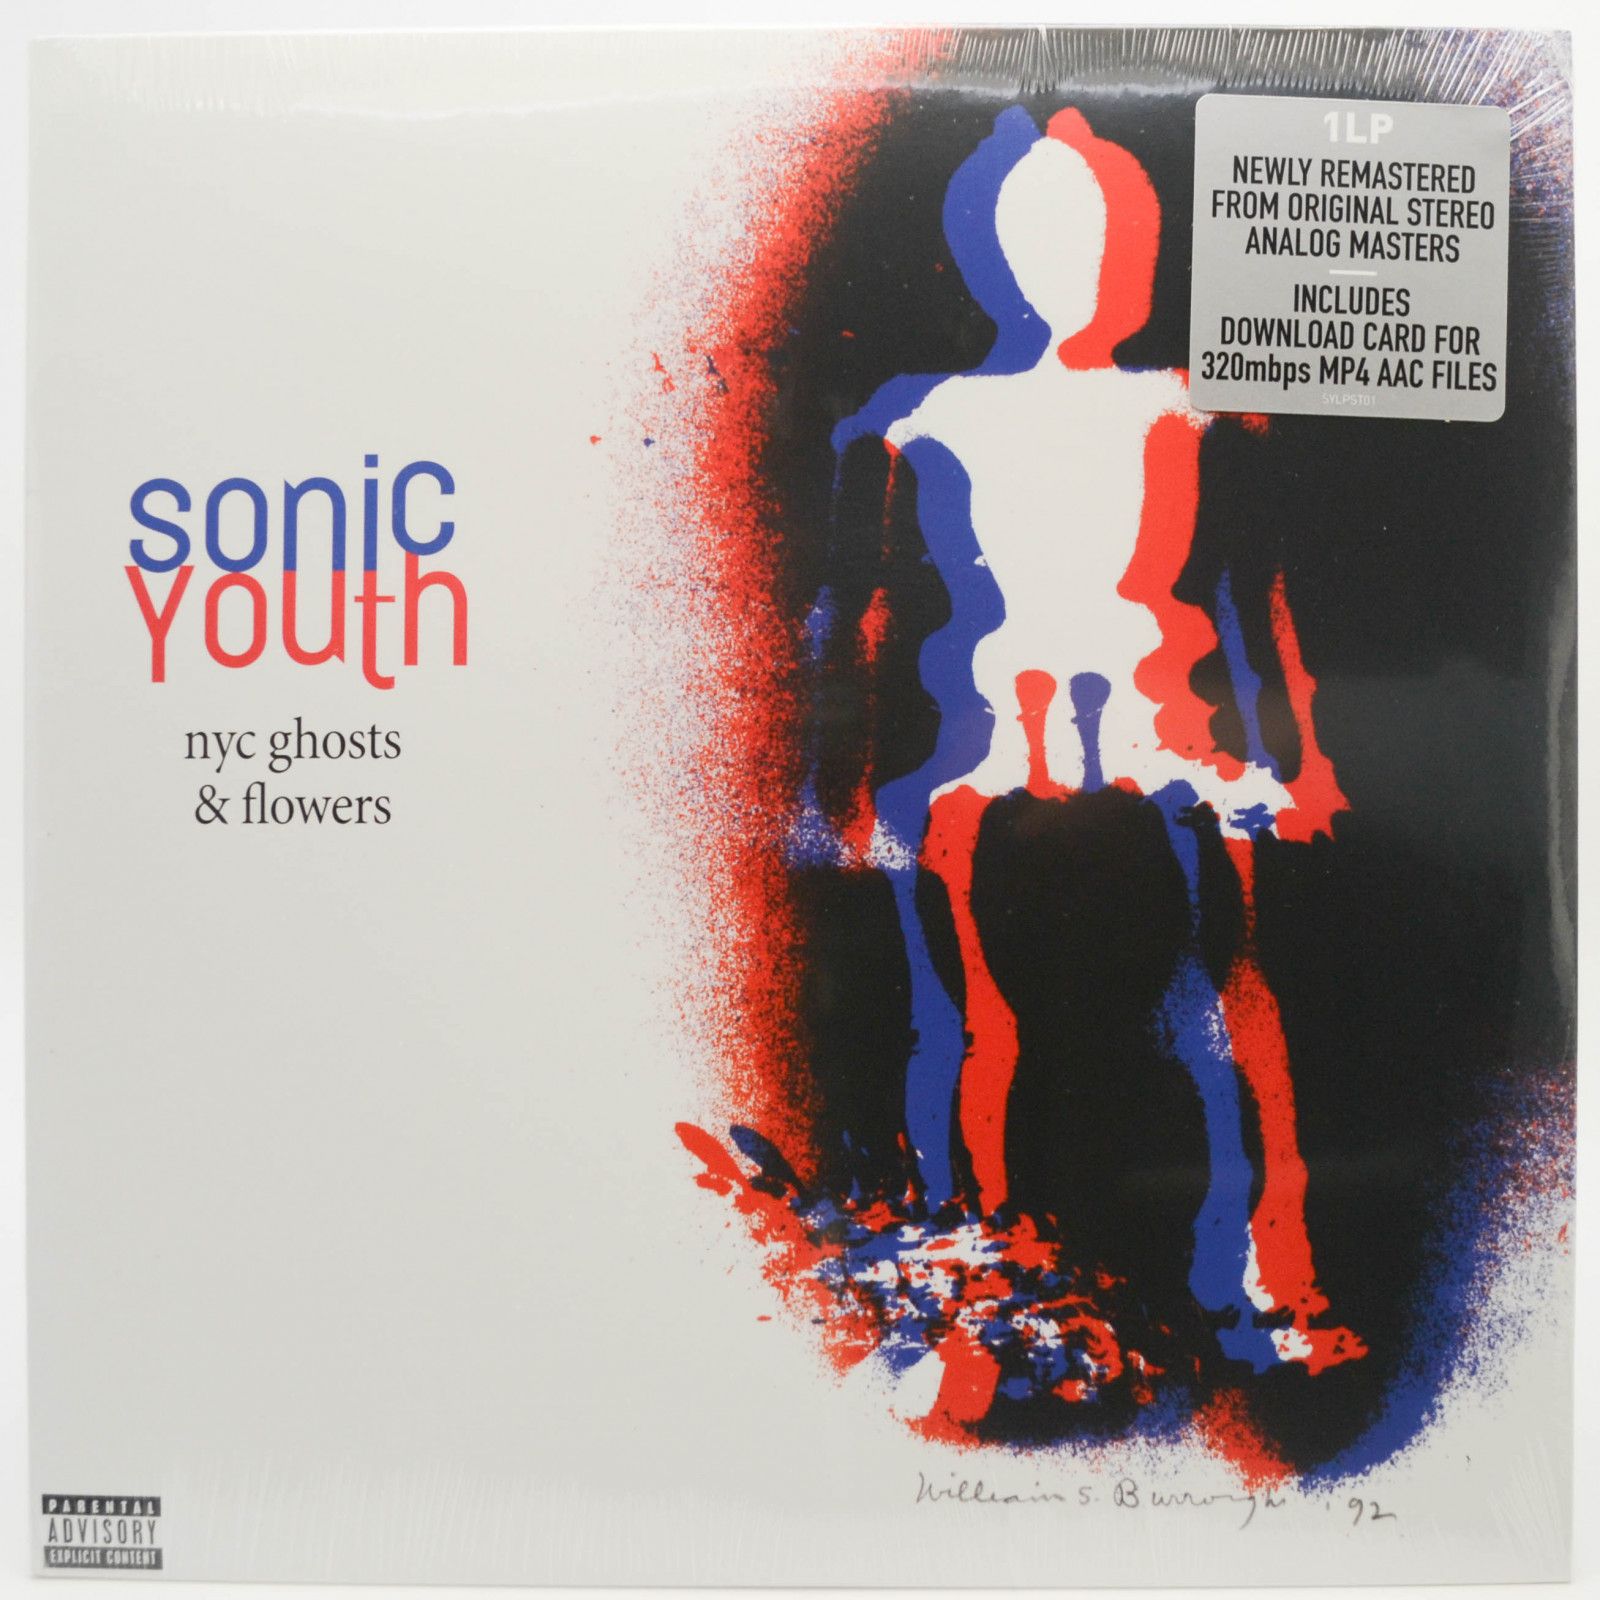 Sonic Youth — NYC Ghosts & Flowers, 2000